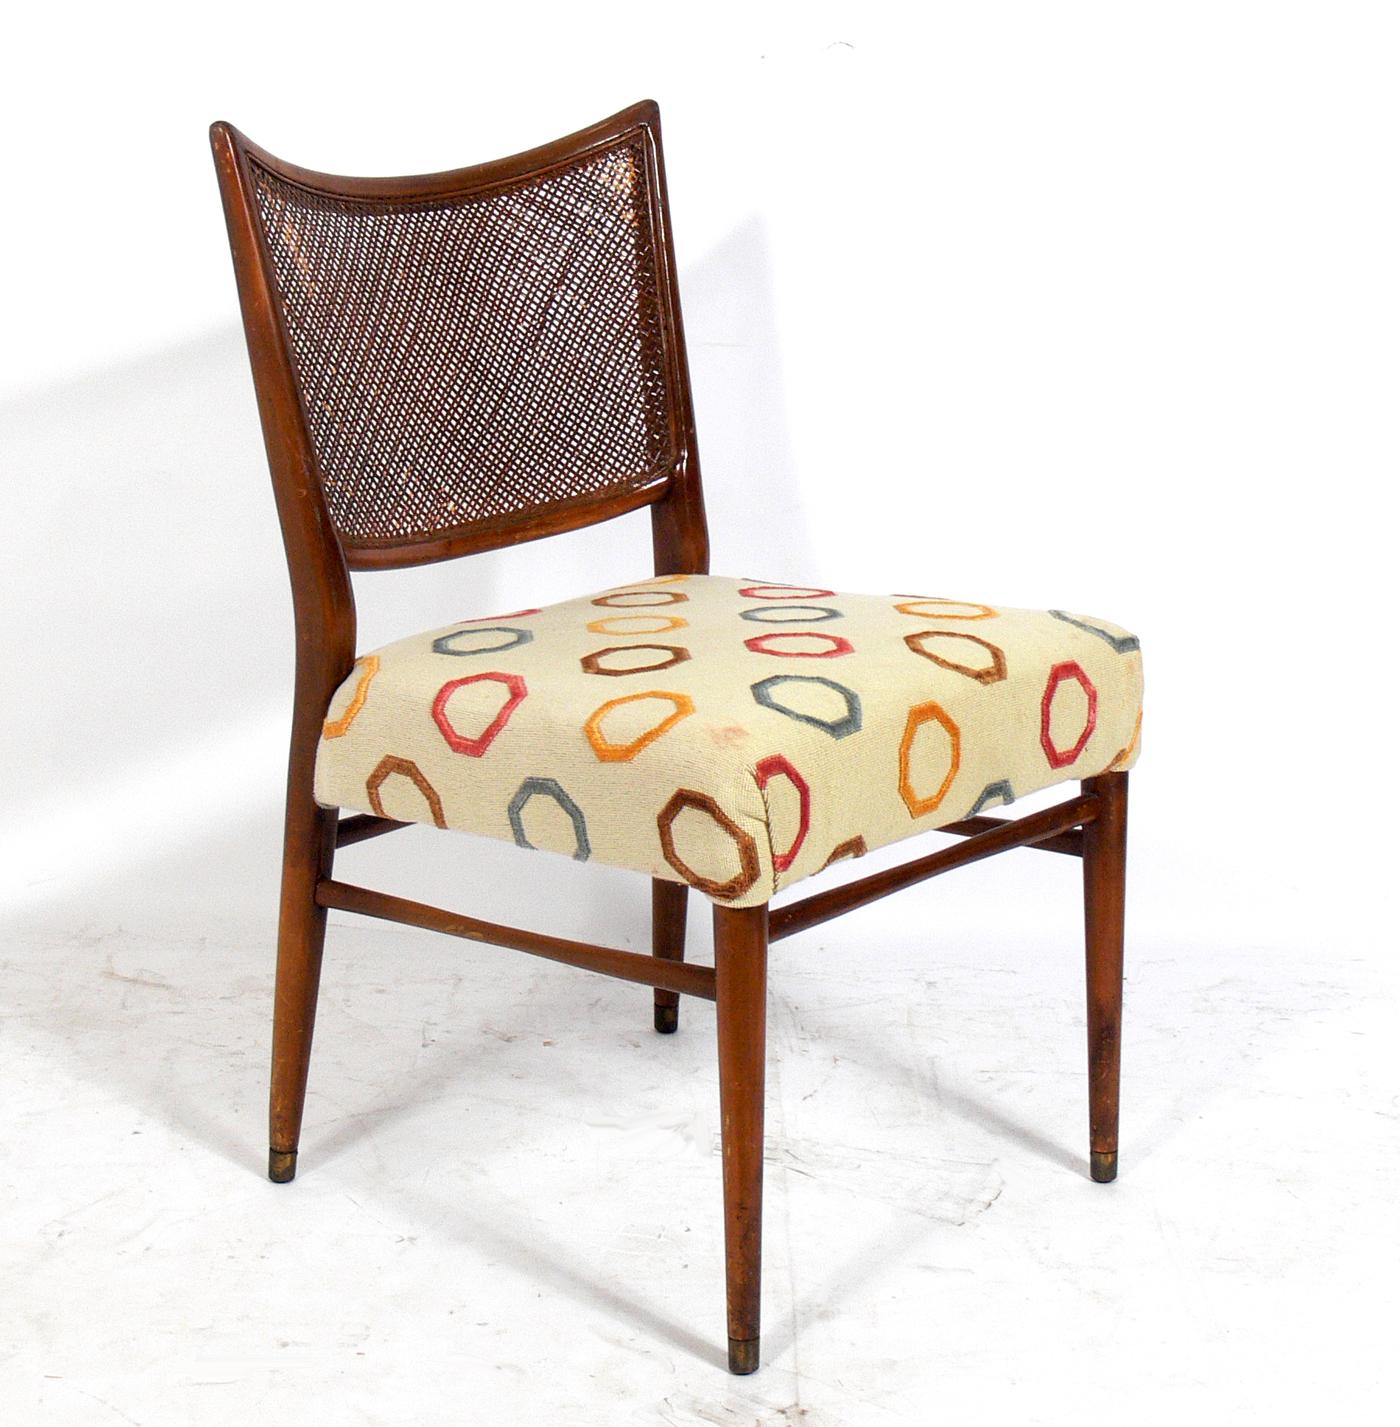 Six caned back dining chairs, probably French, circa 1950s. They are currently being refinished and reupholstered and can be completed in your choice of finish color and in your fabric. Simply send us the fabric after purchase. The price noted below